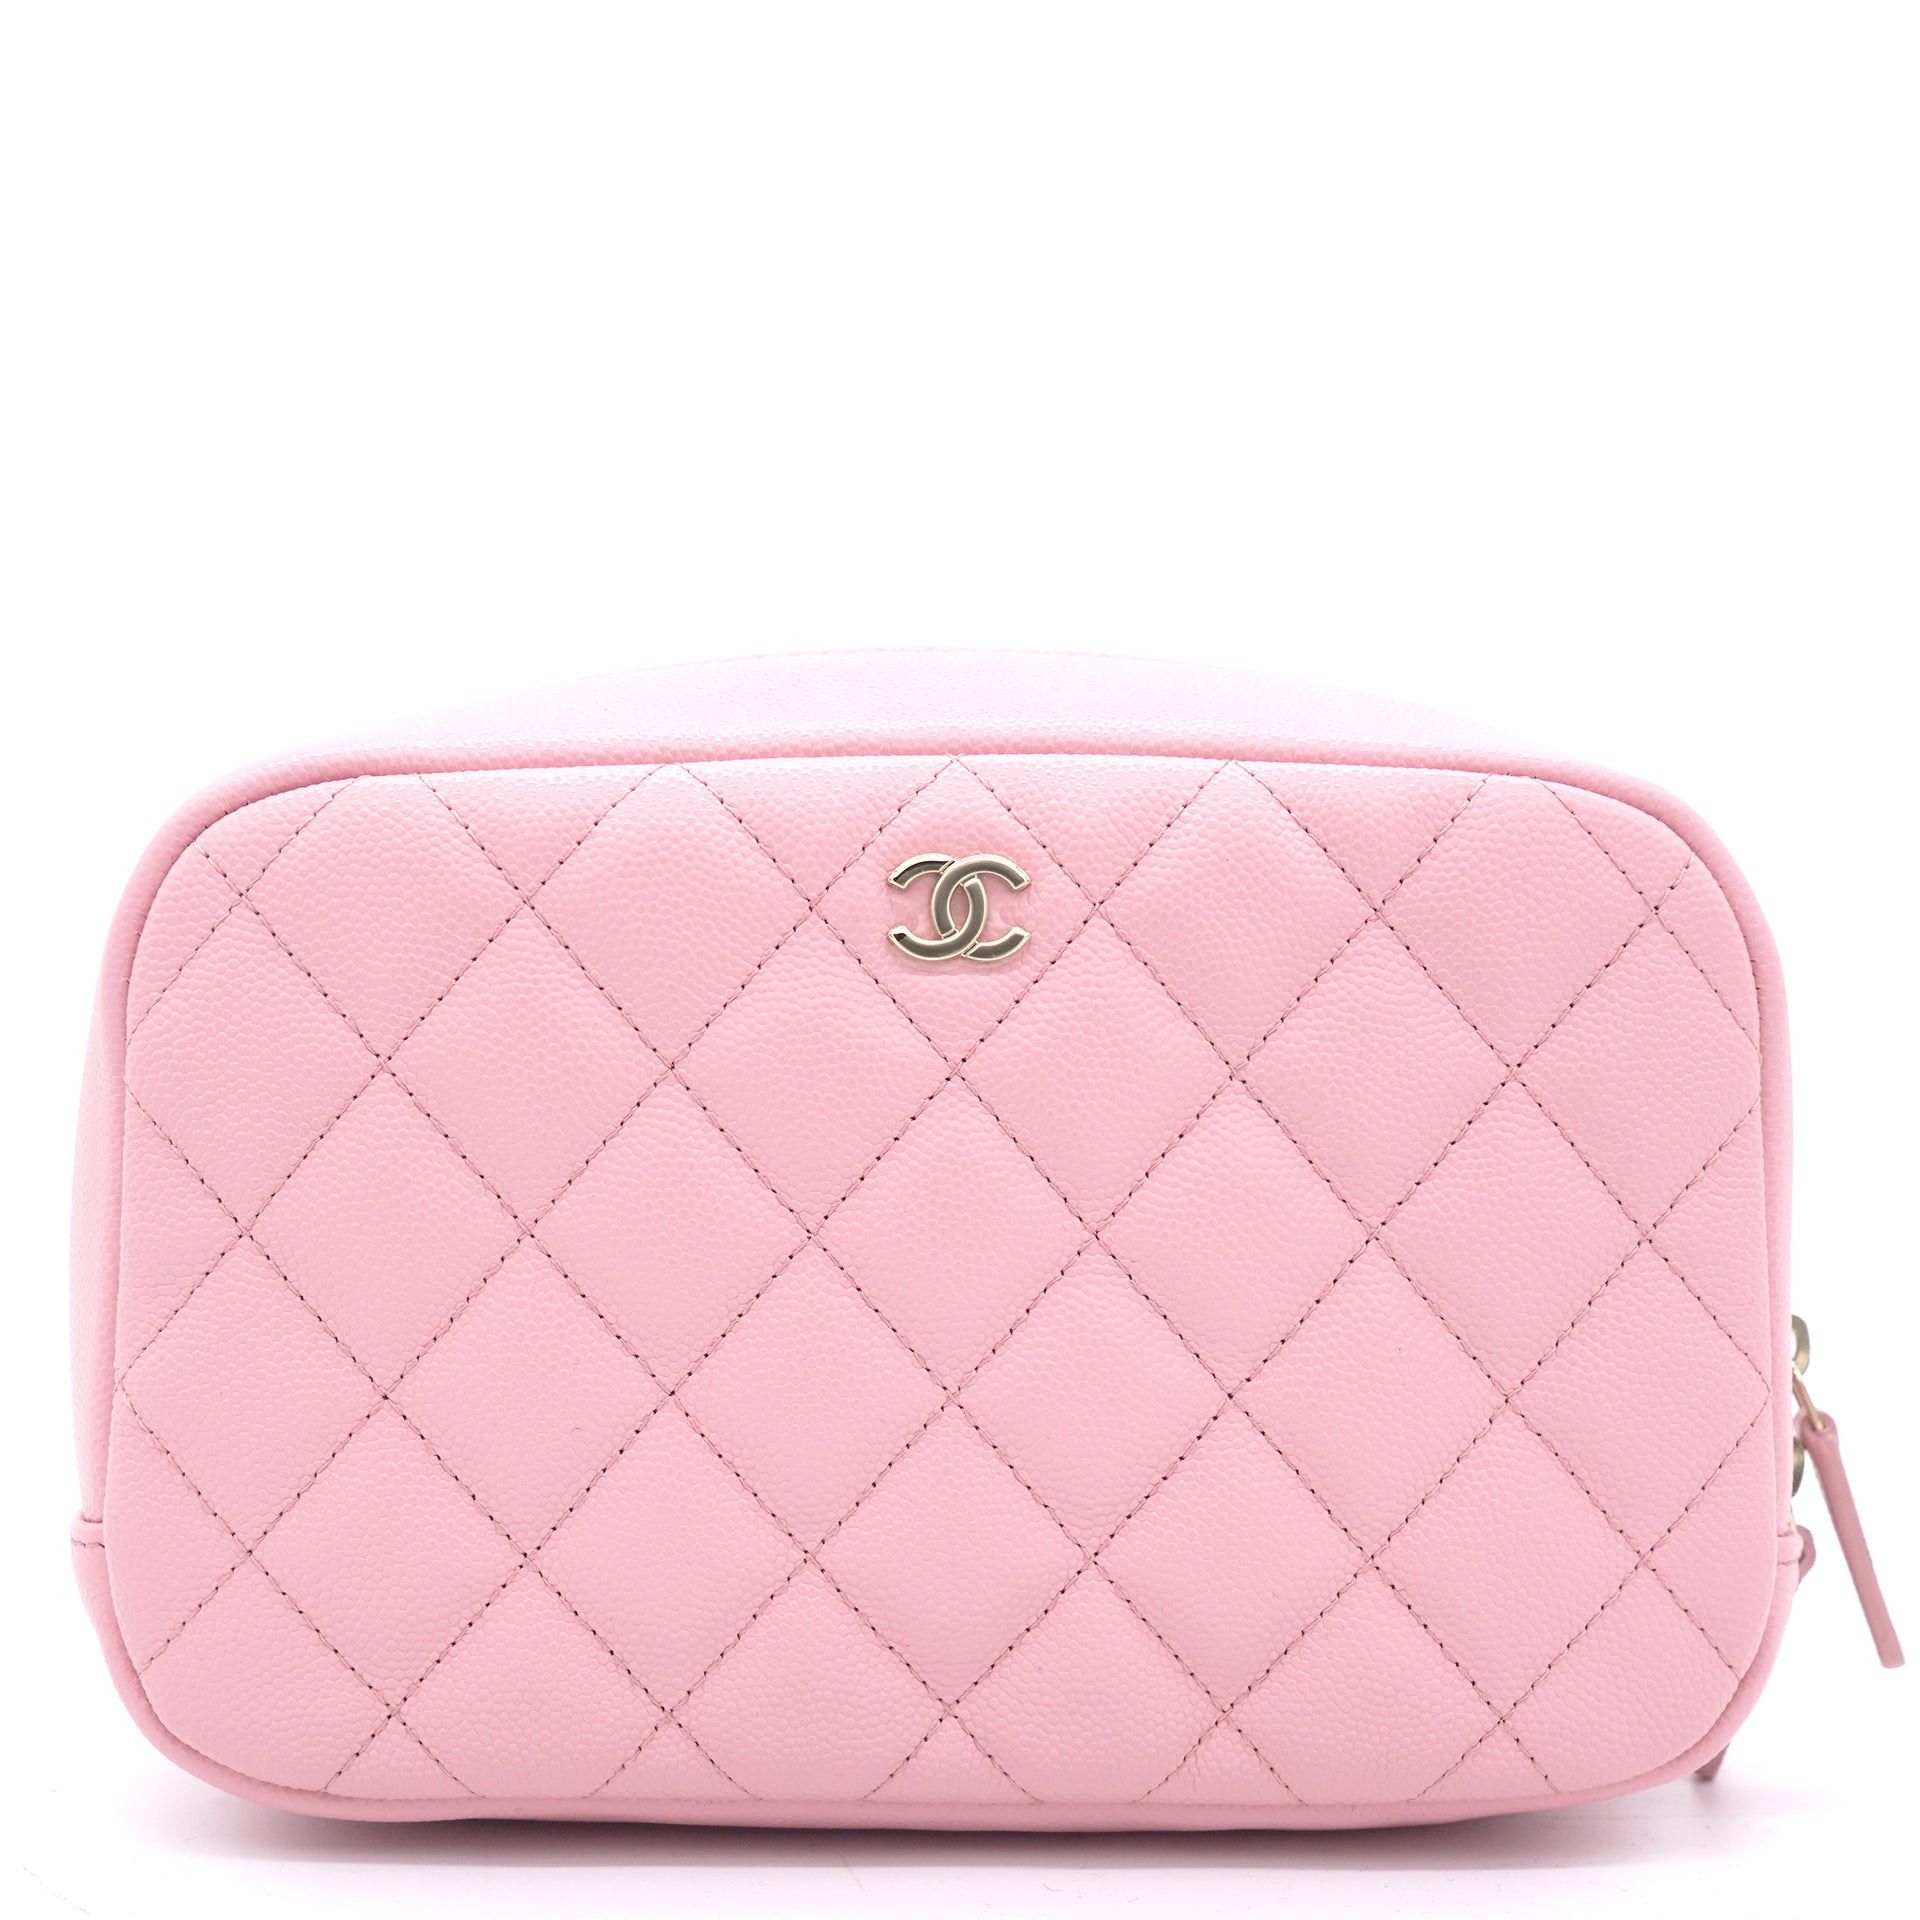 Chanel Cosmetic Case Bag